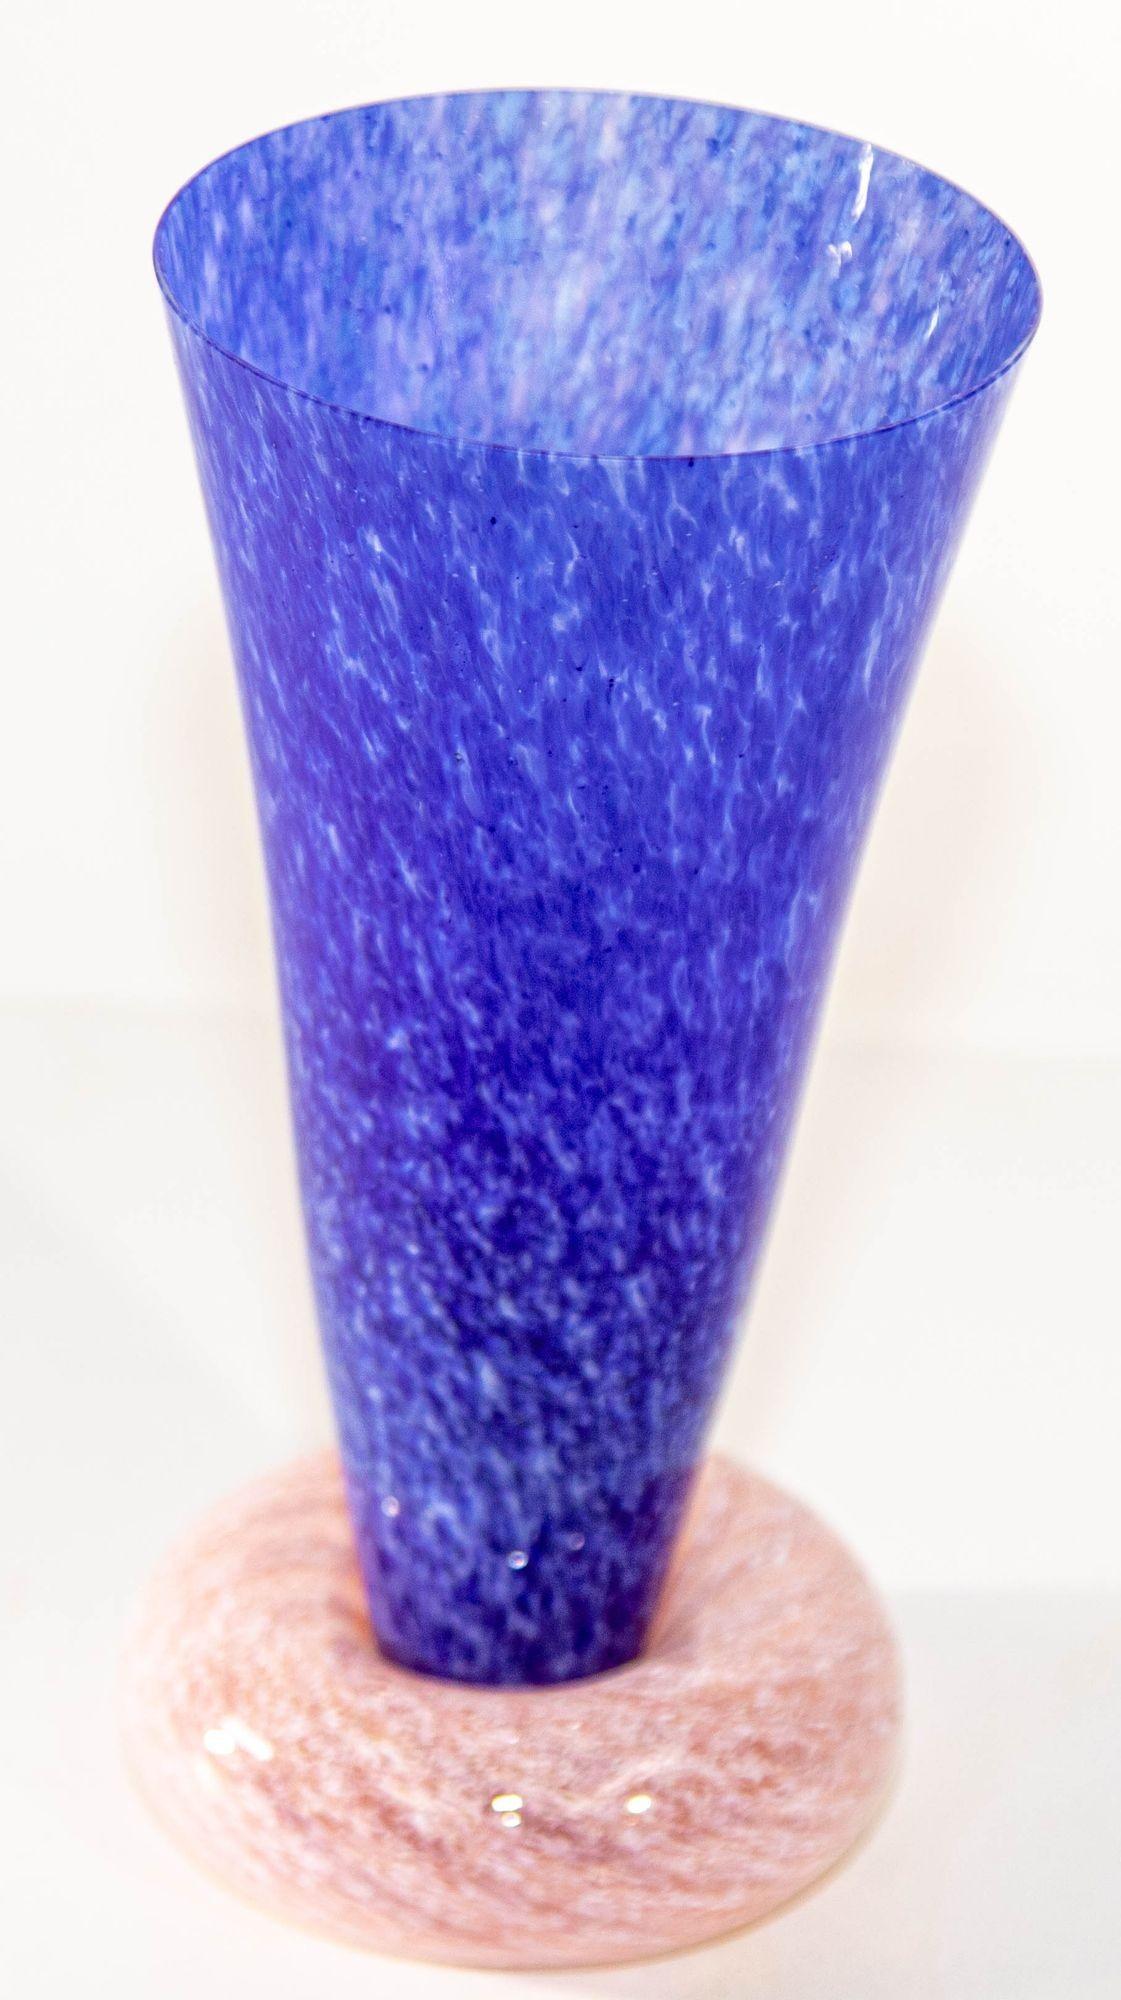 Vintage Guy Corrie Union Glass Donut base art glass vase in cobalt blue and pink 1980's.
Cobalt blue and pink art glass vase by R Guy Corrie, Union Street Glass company. Richmond, CA.
The vase features cobalt blue art glass body with a pink donut